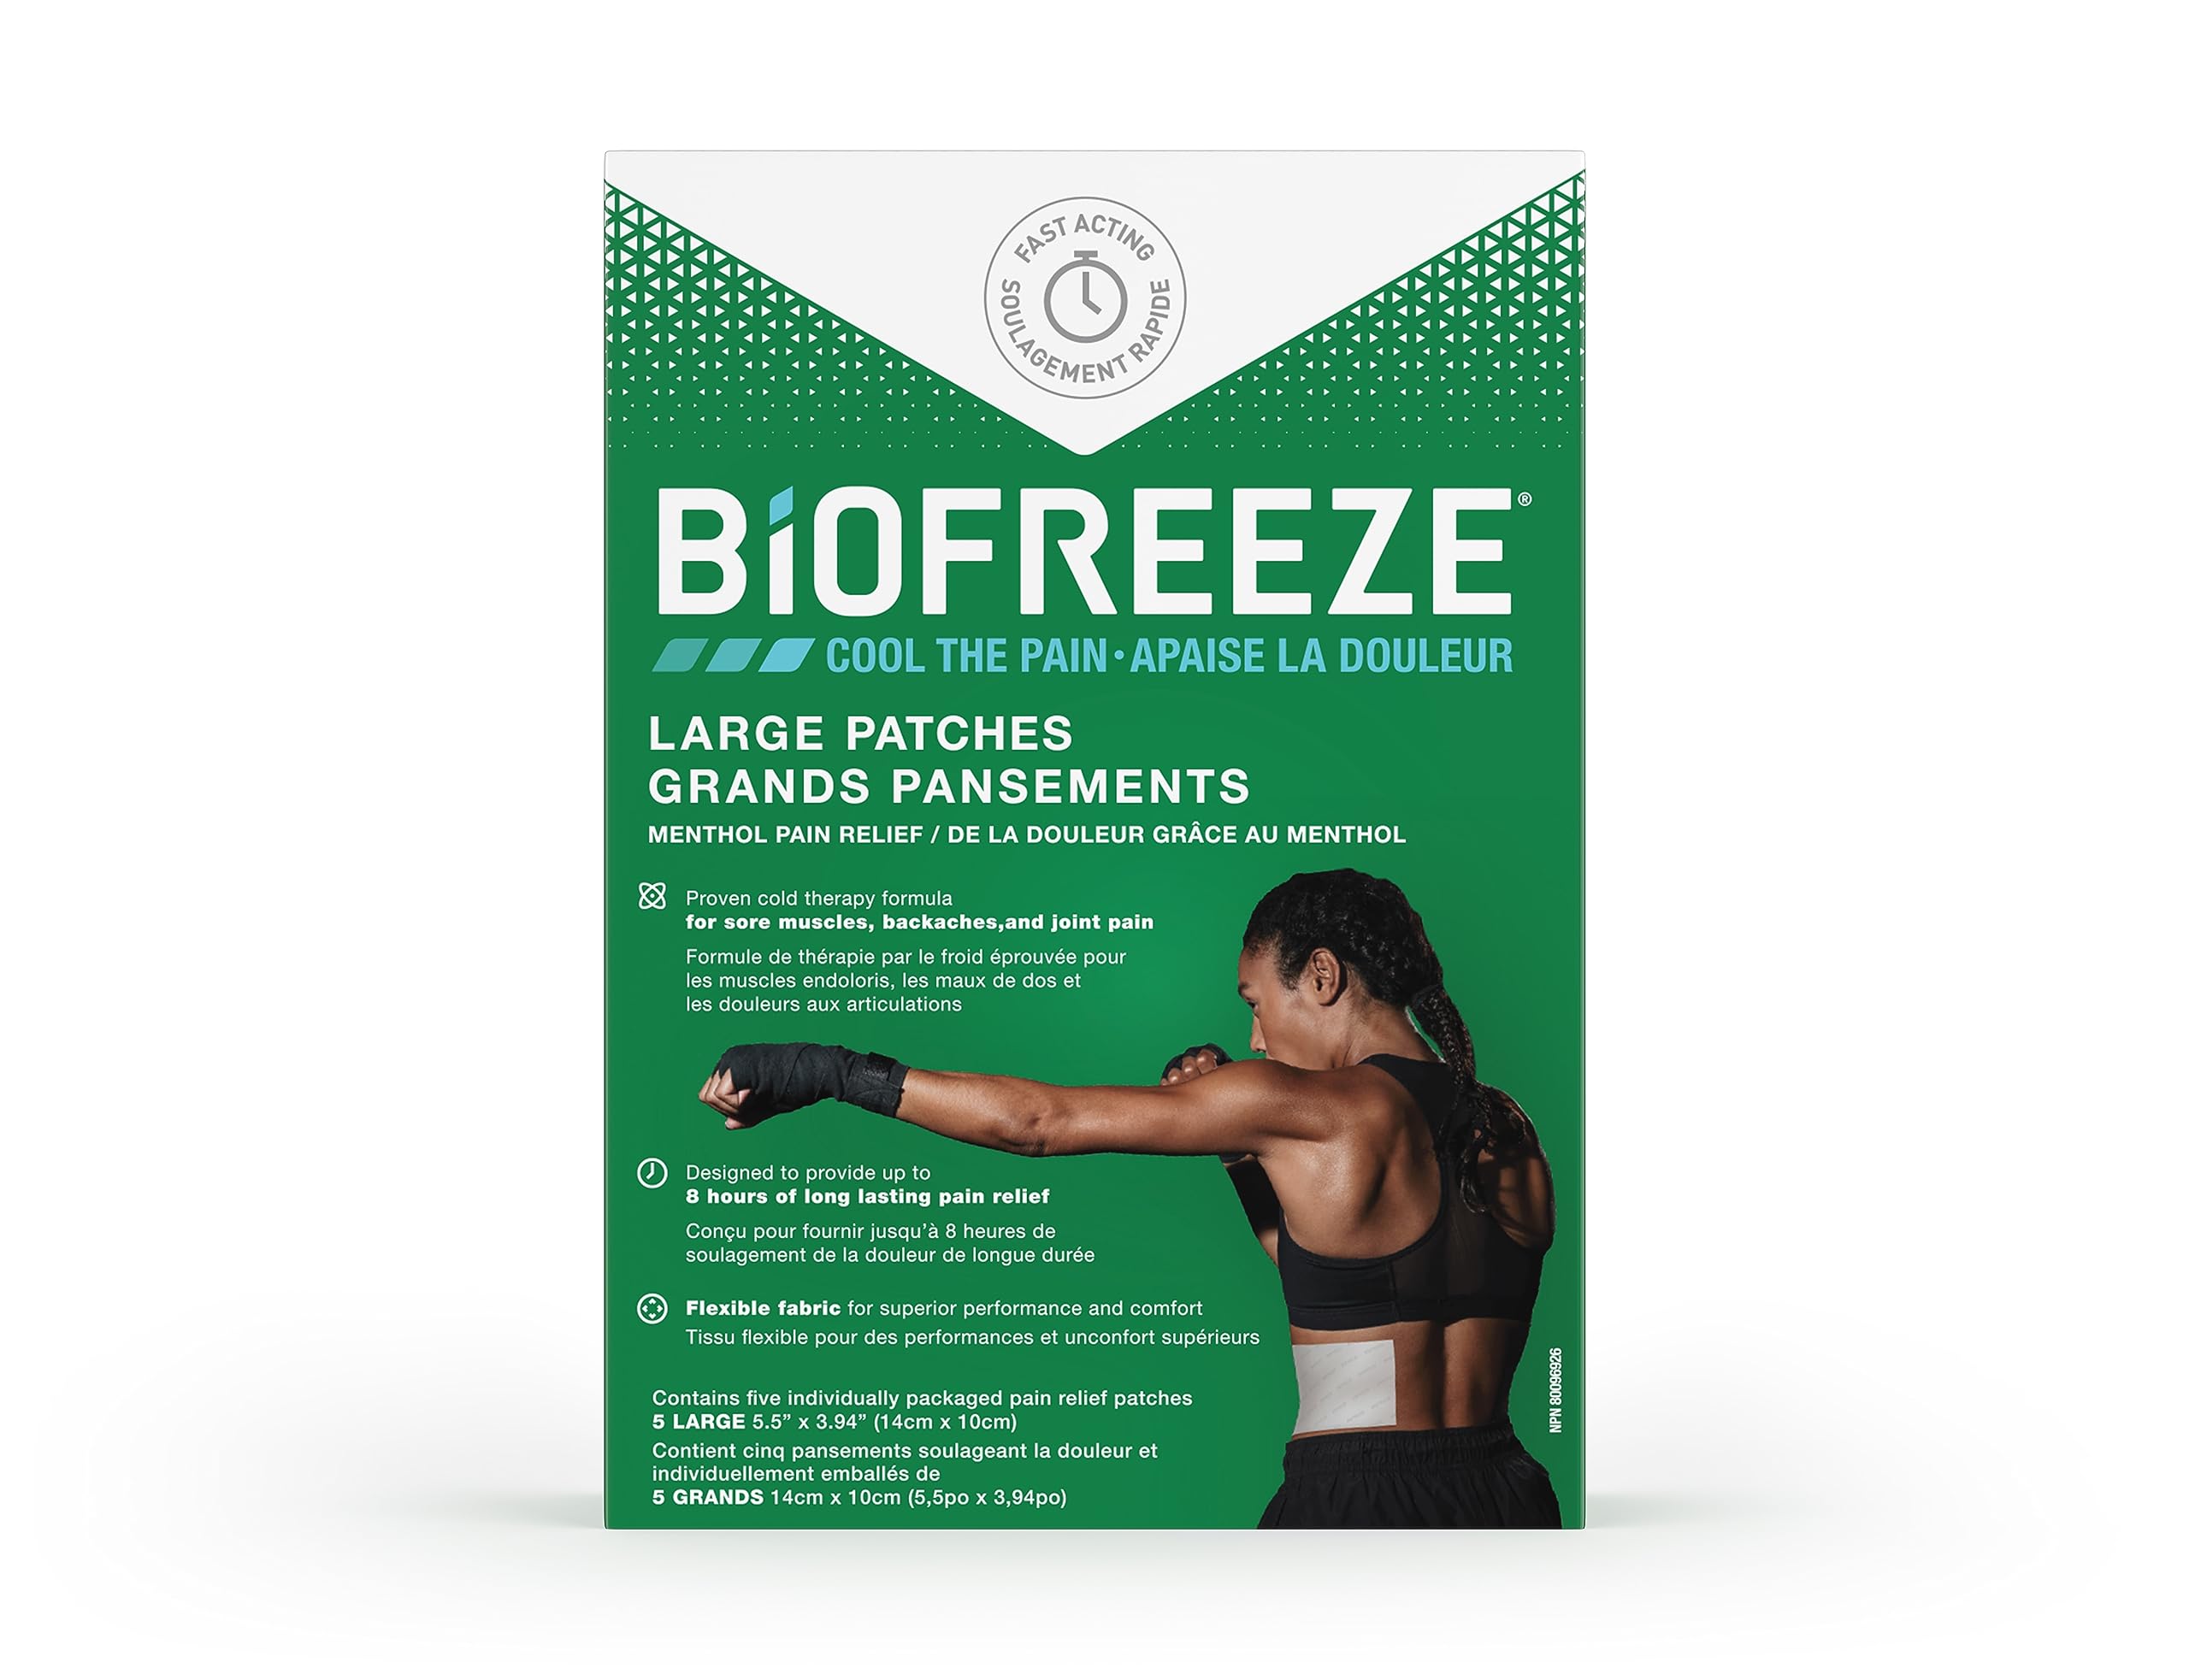 BioFreeze Large Patch, for Sore Muscles, Backaches and Joint Pain, 5 large patches